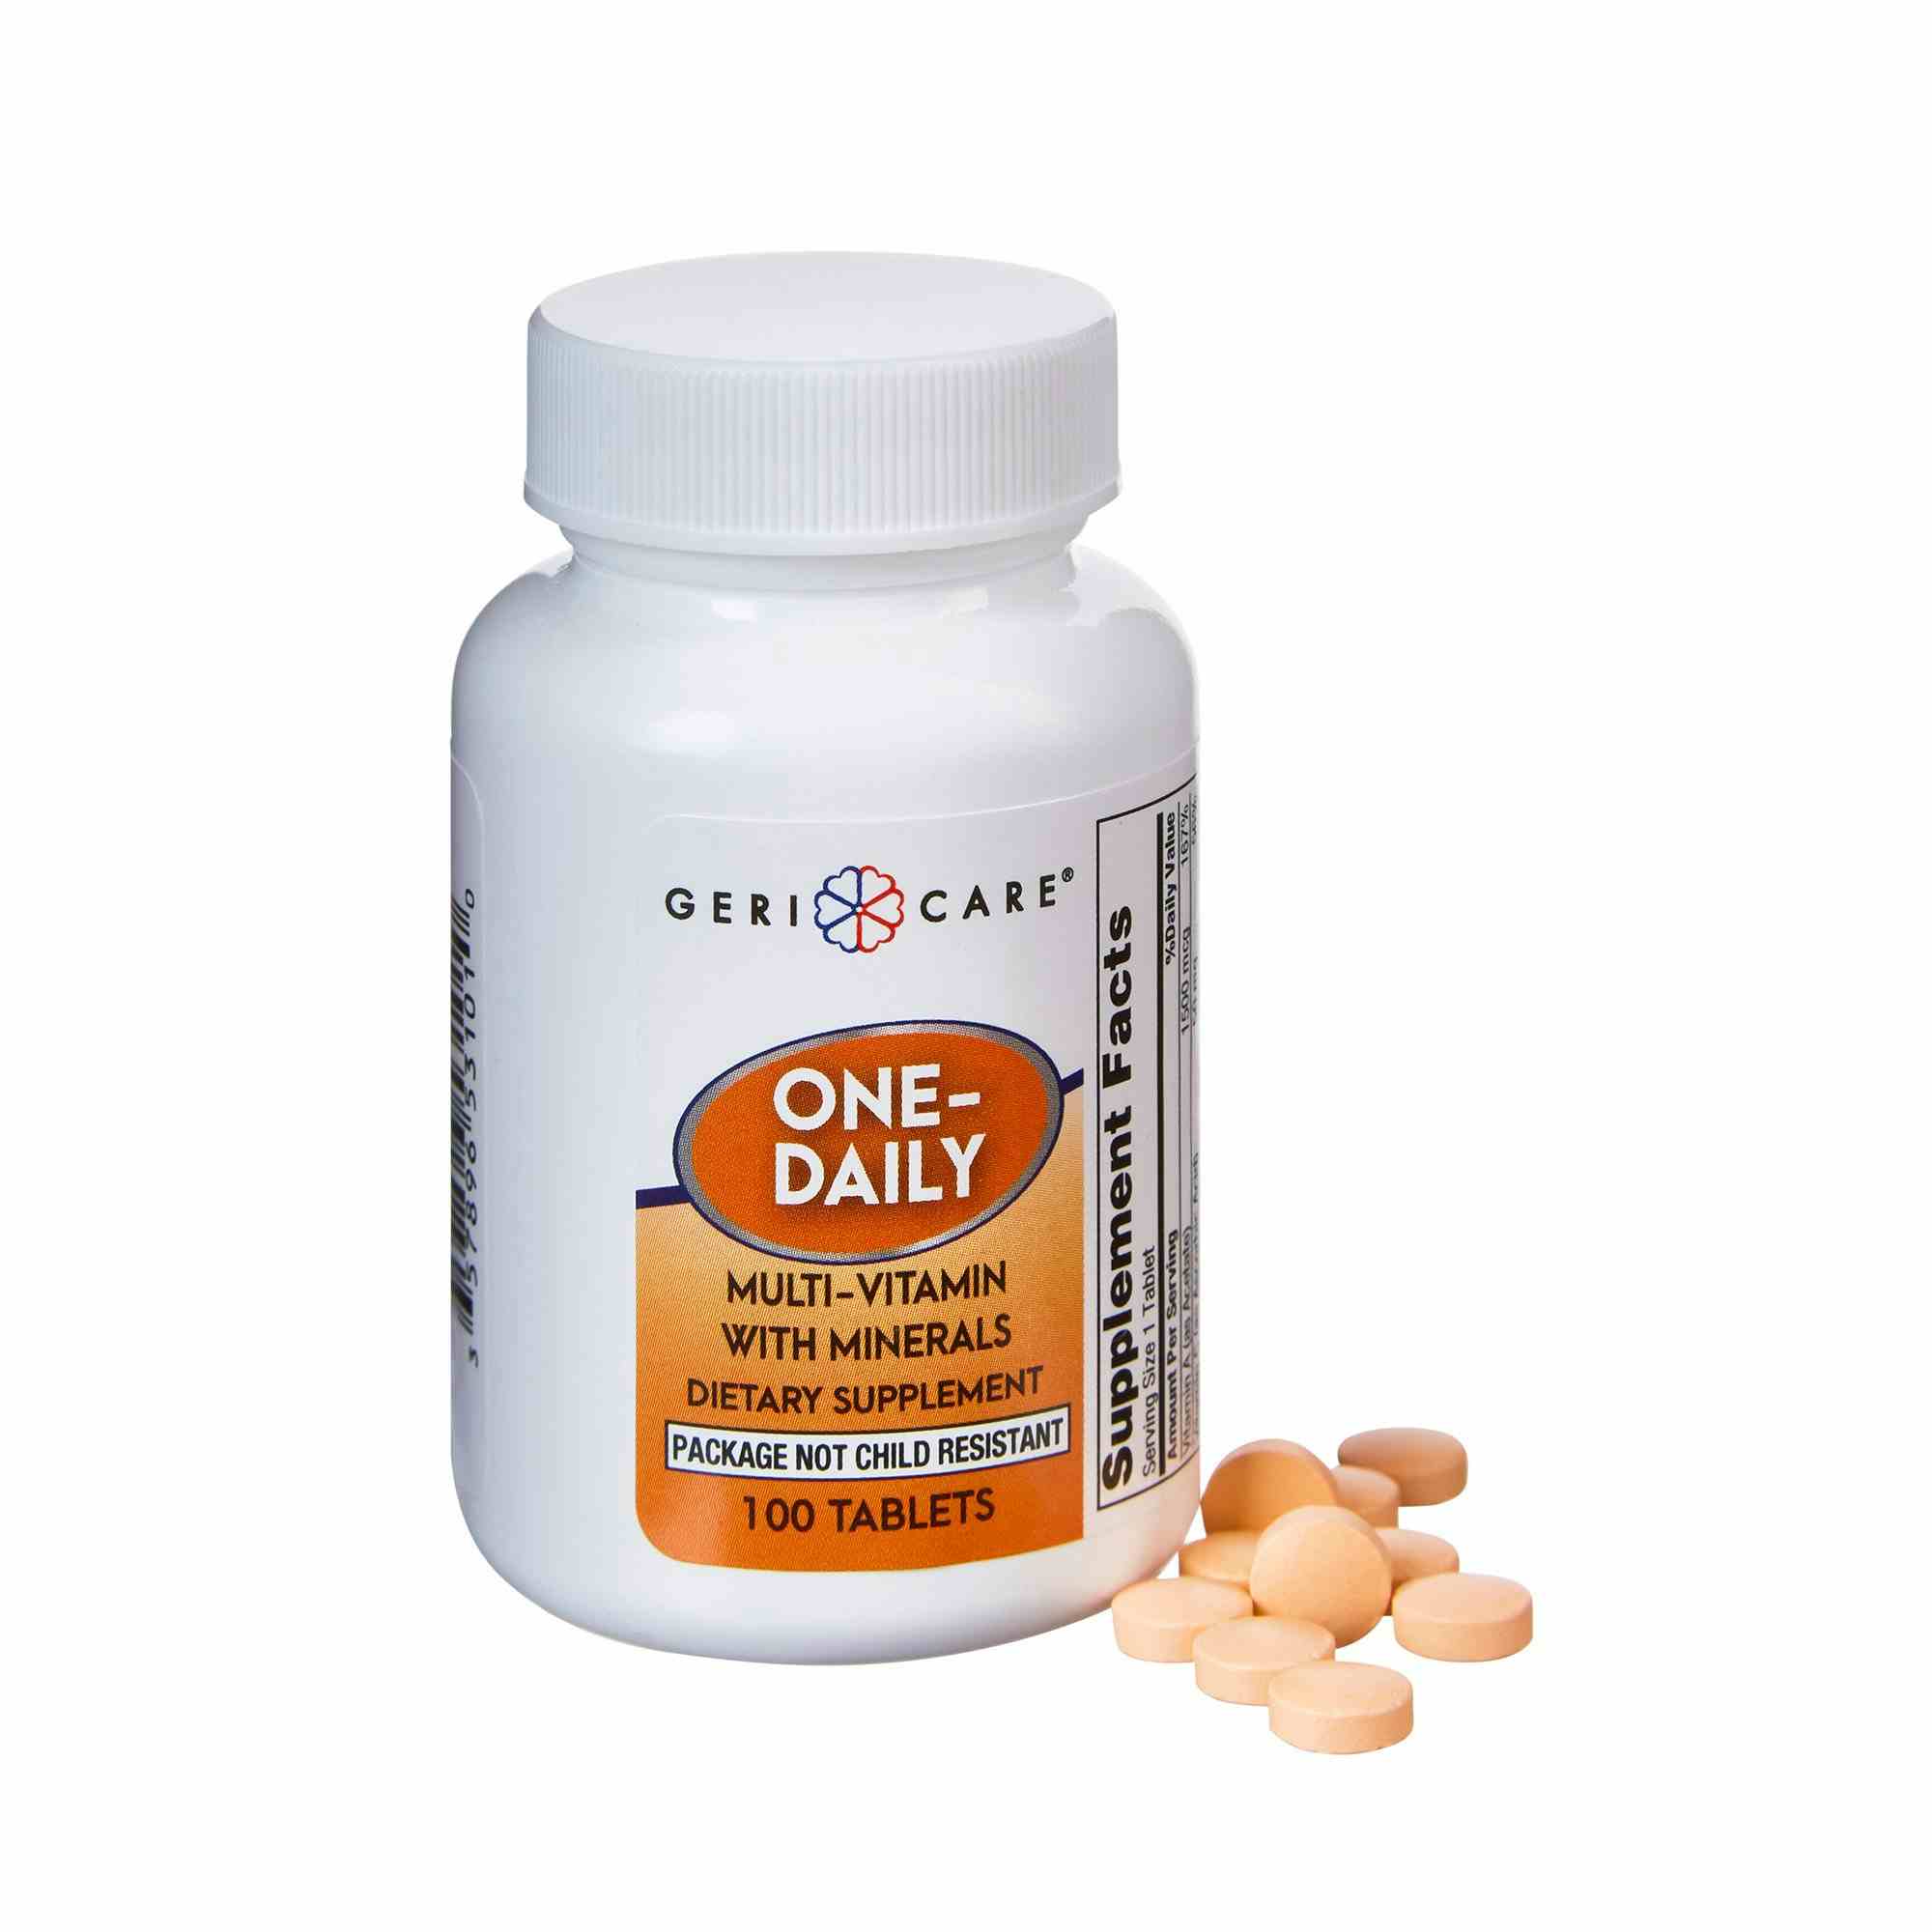 Geri-Care One-Daily Multi Vitamin with Minerals, 100 Tablets, 531-01-GCP, 1 Bottle